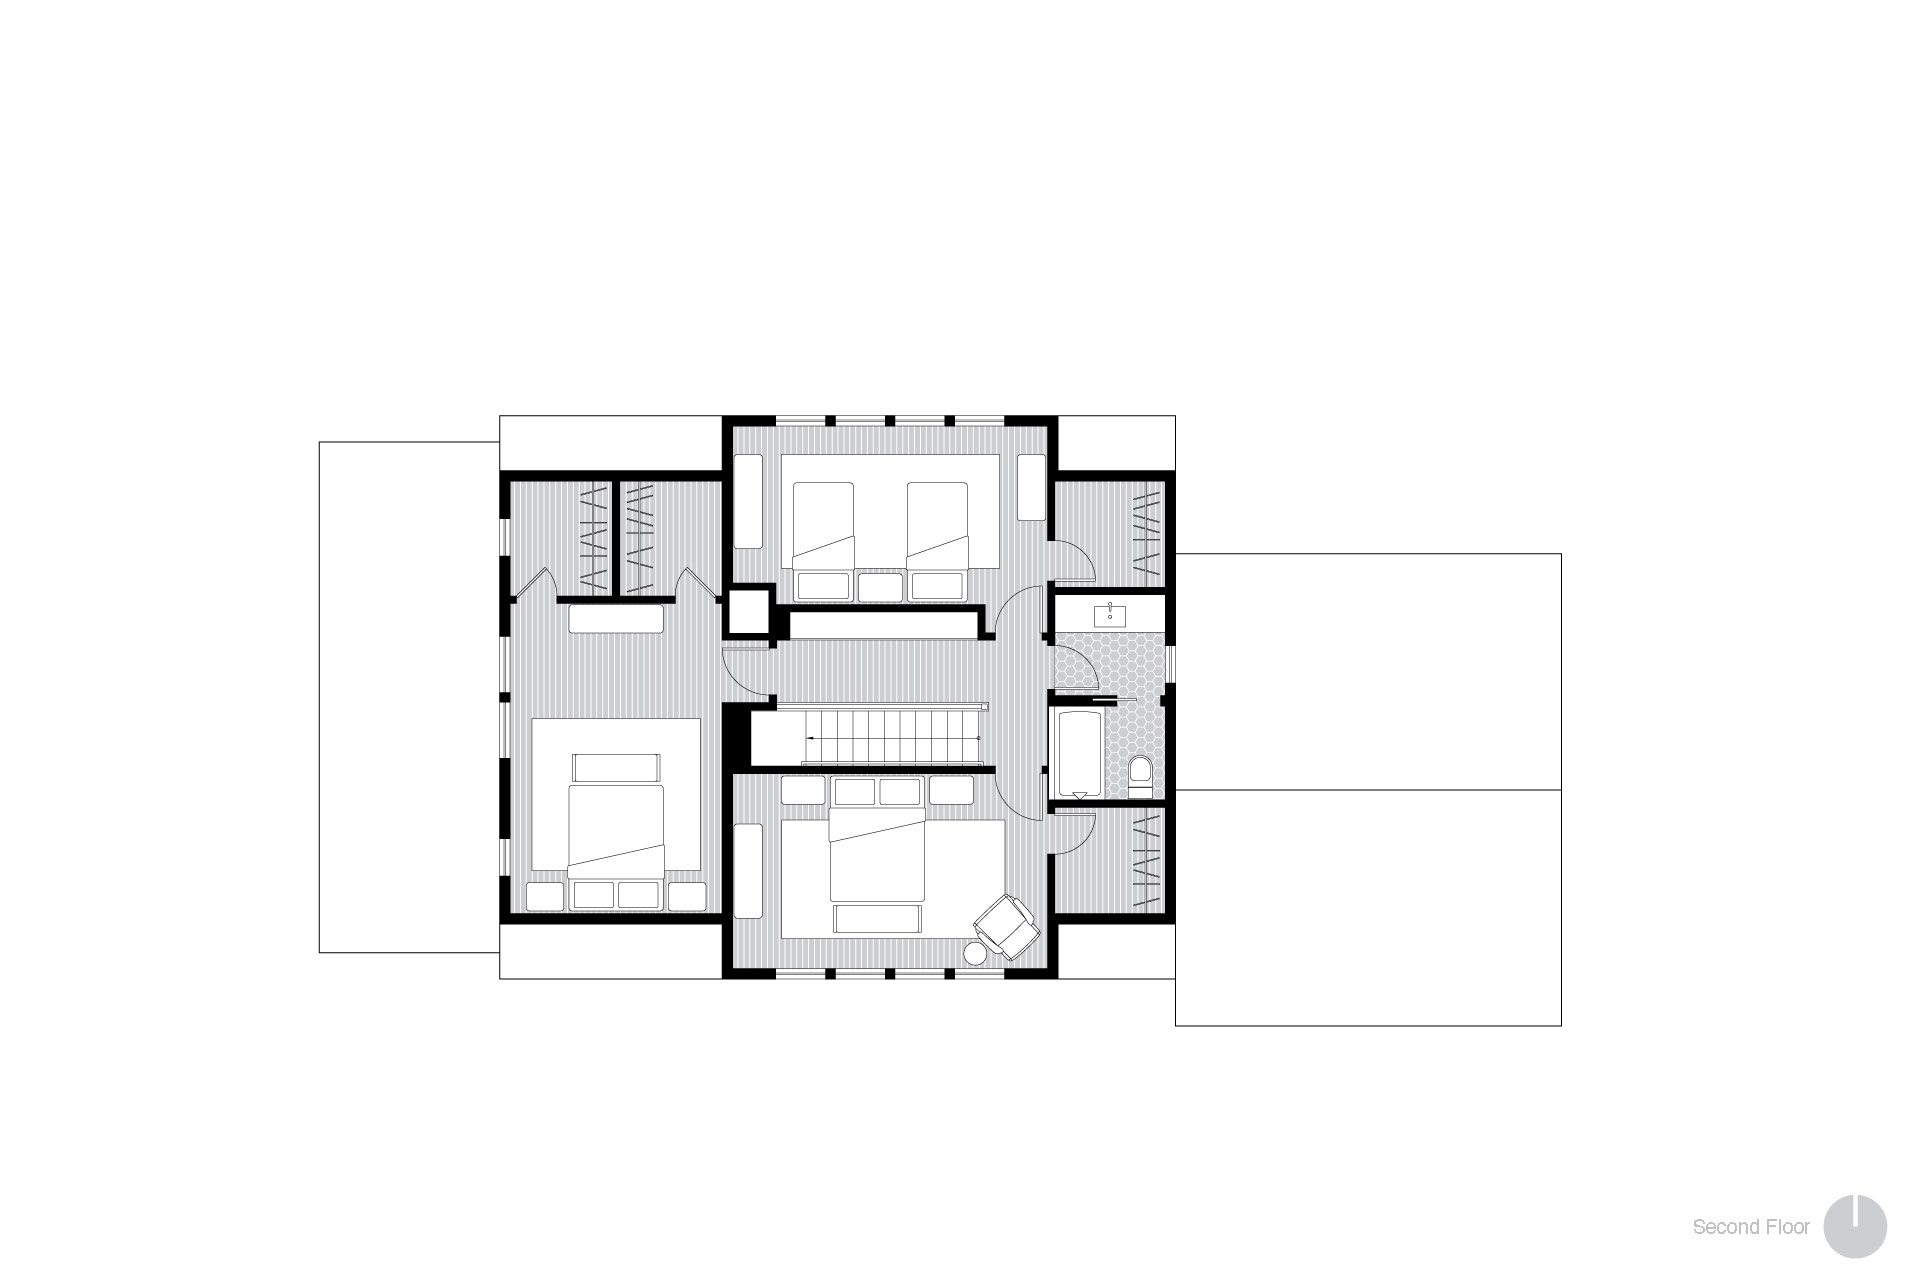 This is a plan drawing of the renovated second floor at the Alameda Craftsman.